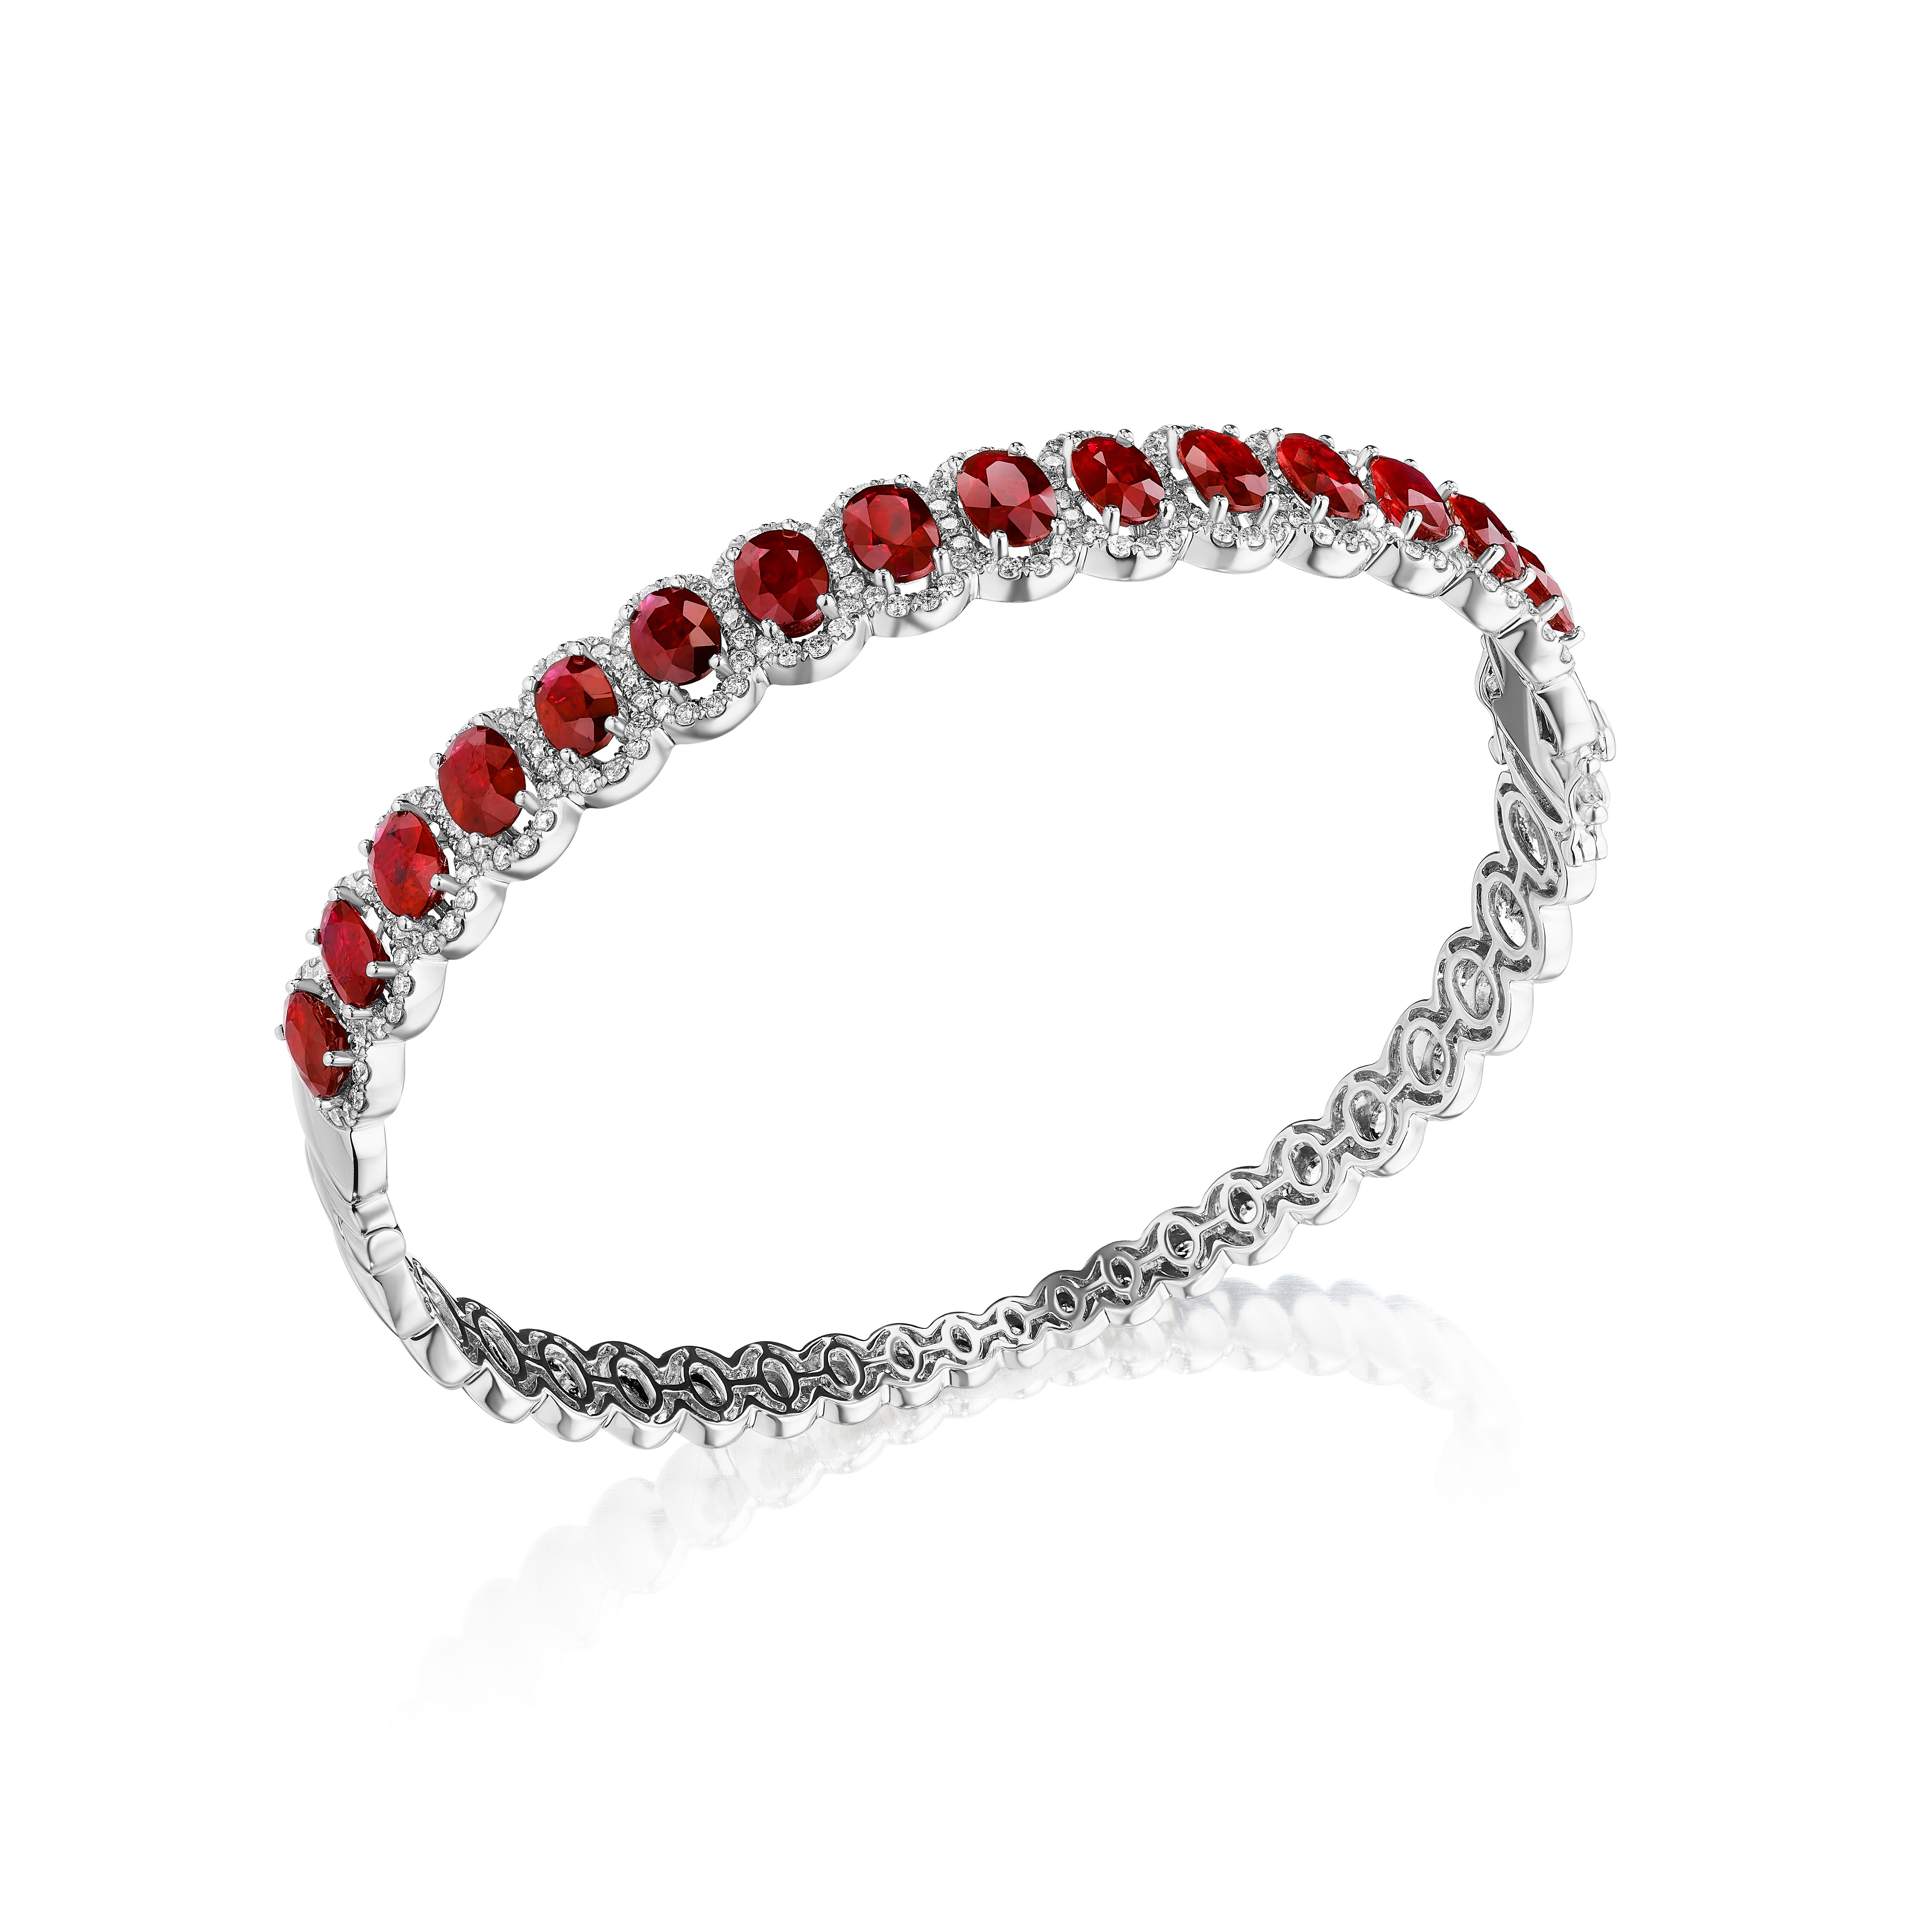 •	A truly exquisite assortment of 15 oval cut deep red rubies is framed by delicate halos made of round brilliant cut diamonds in this beautiful bangle. The stones are set in 14KT white gold and have a combining total weight of approximately 11.85